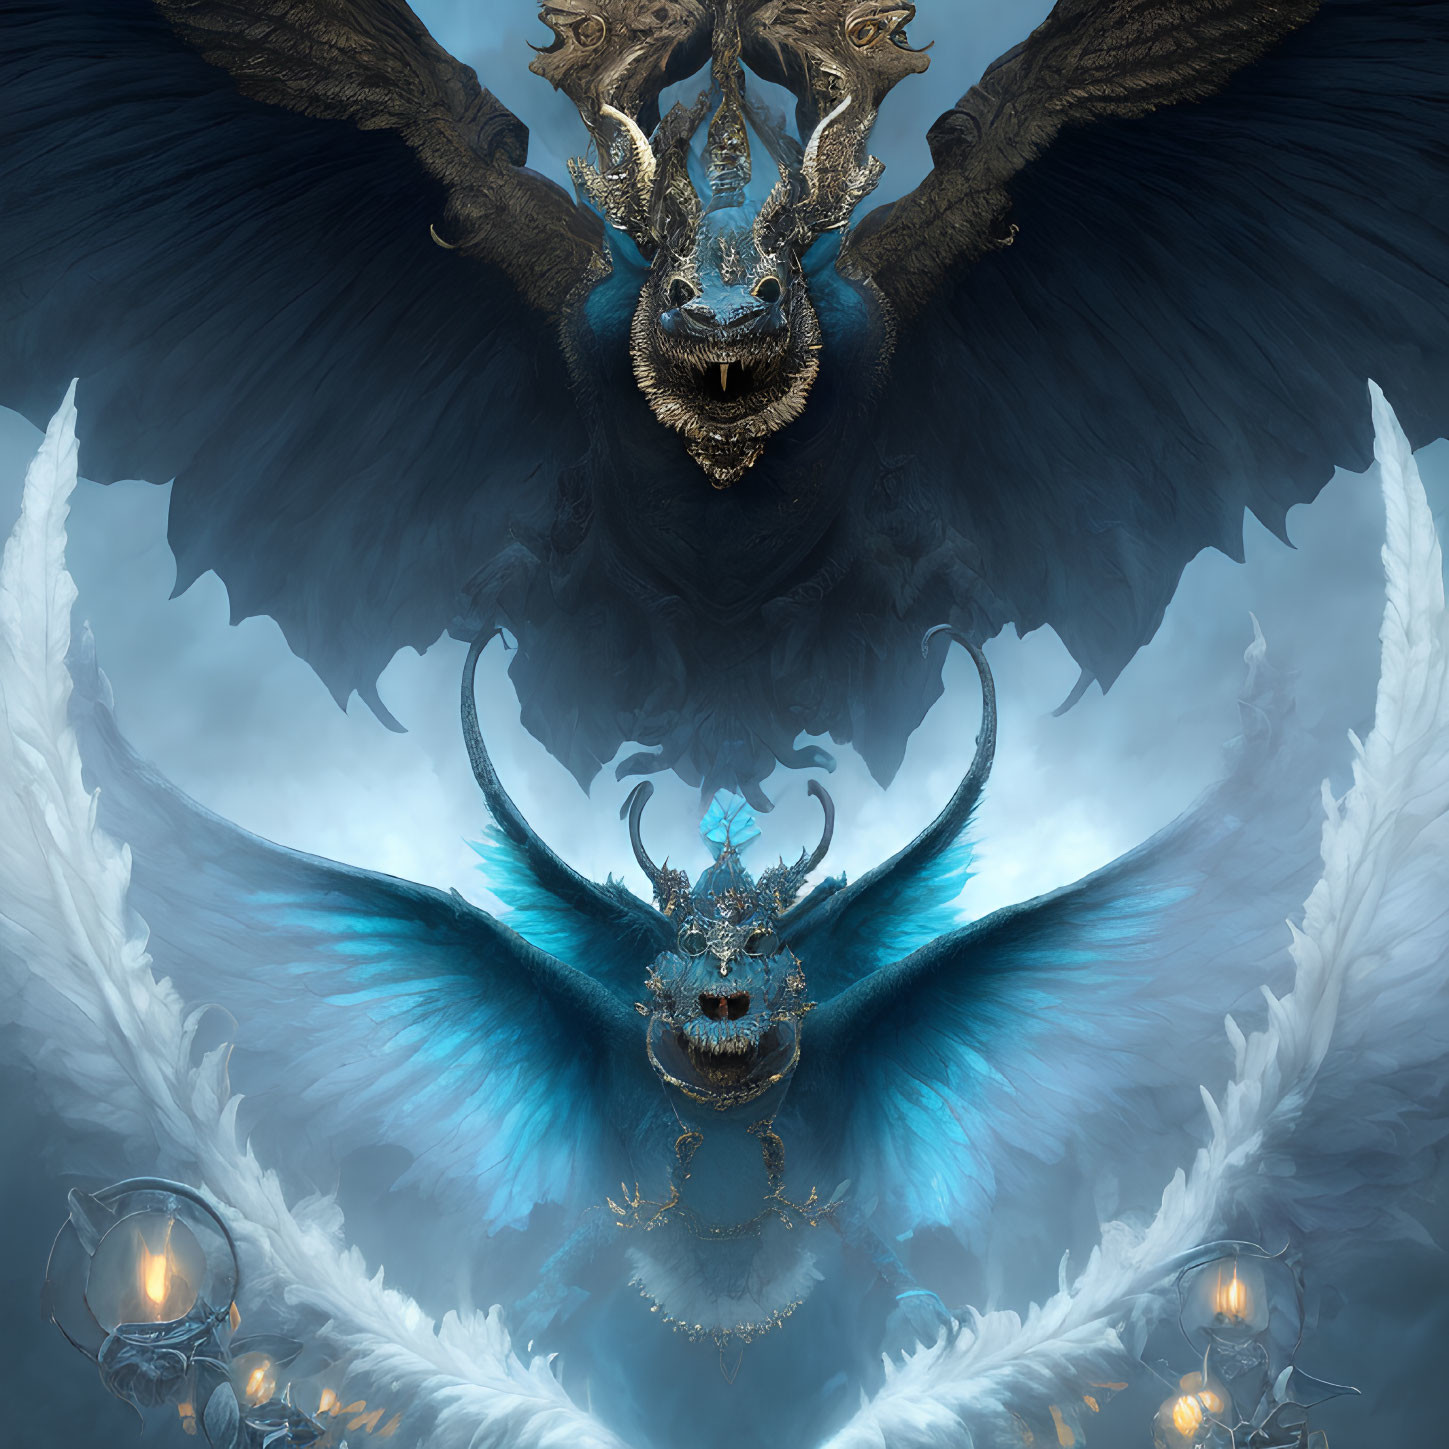 Symmetrical dragon artwork with dark and blue wings, multiple heads